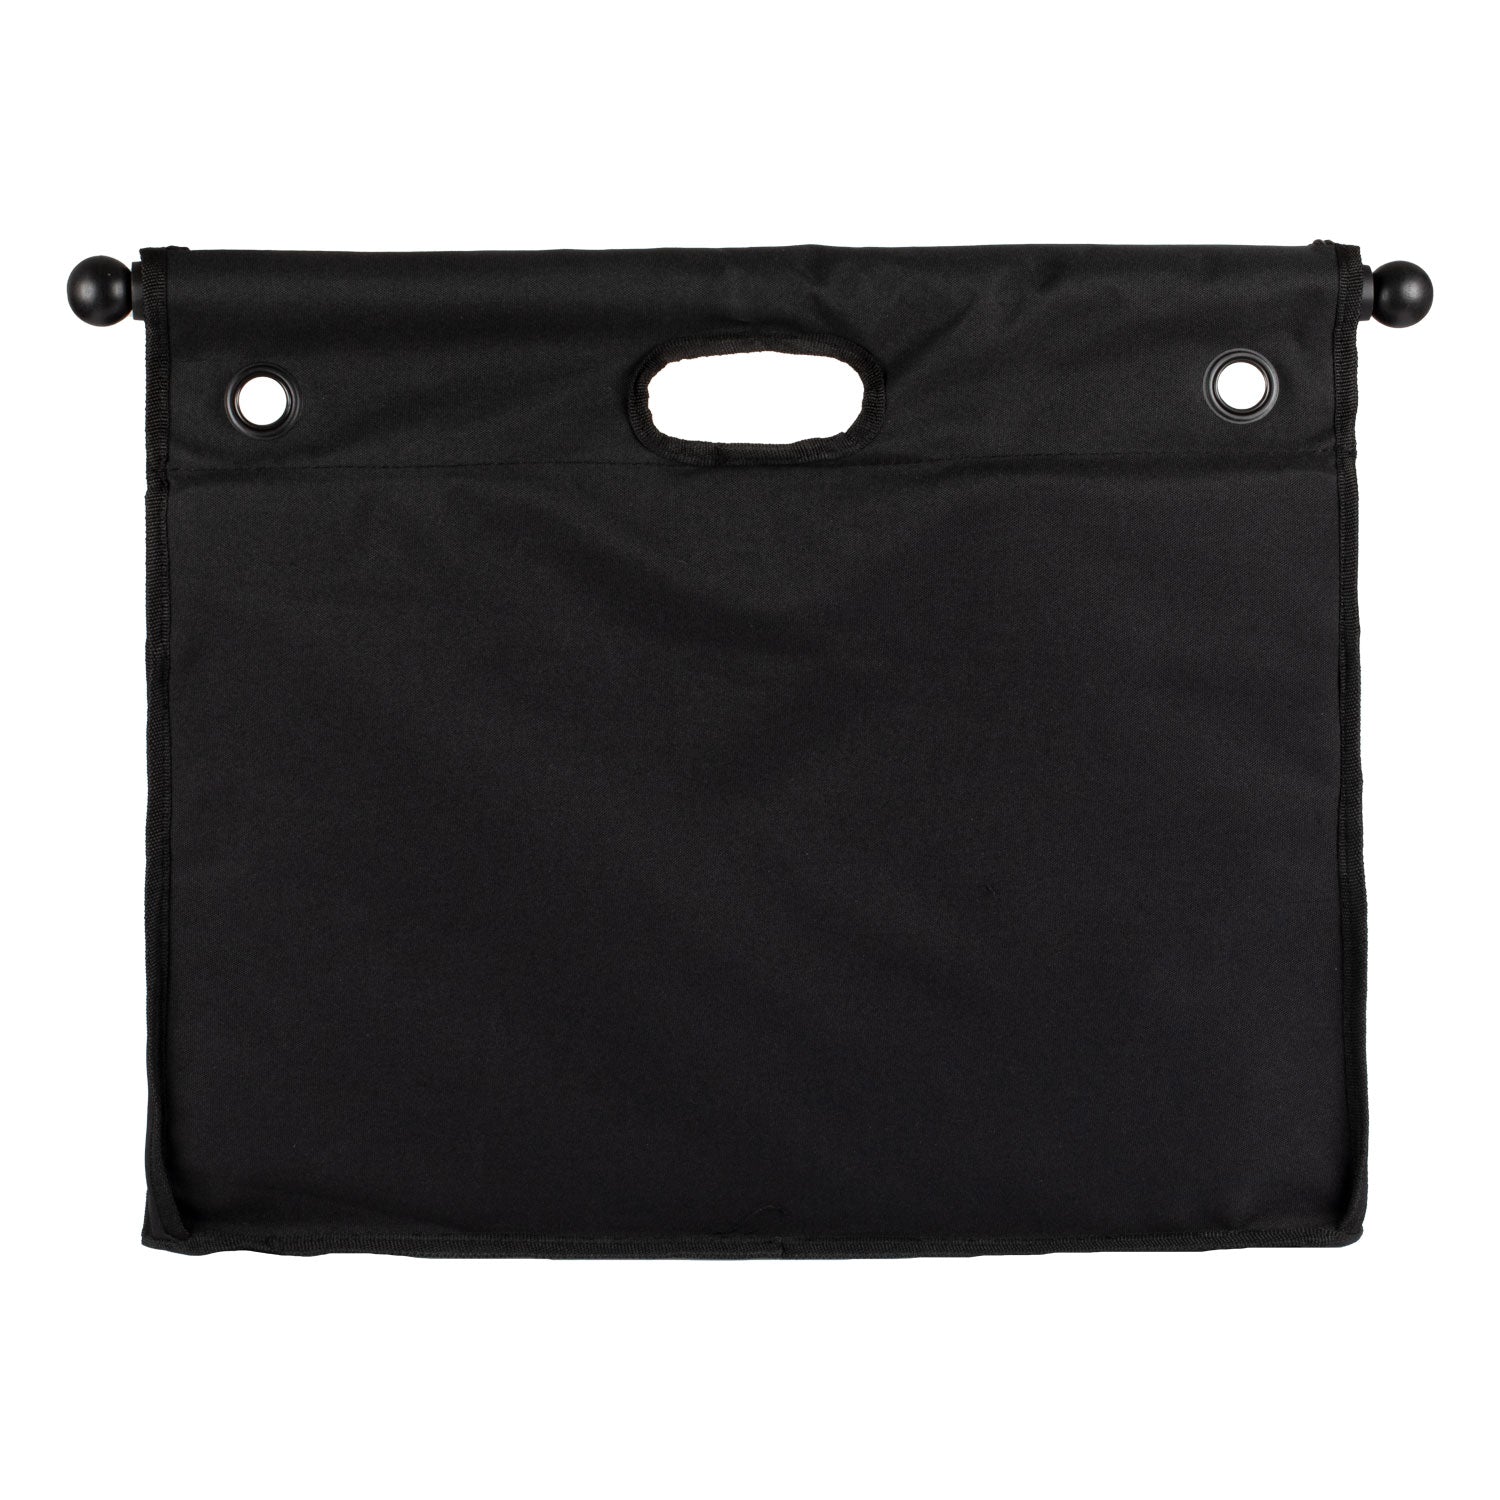 Grooming Bag which can be hanged